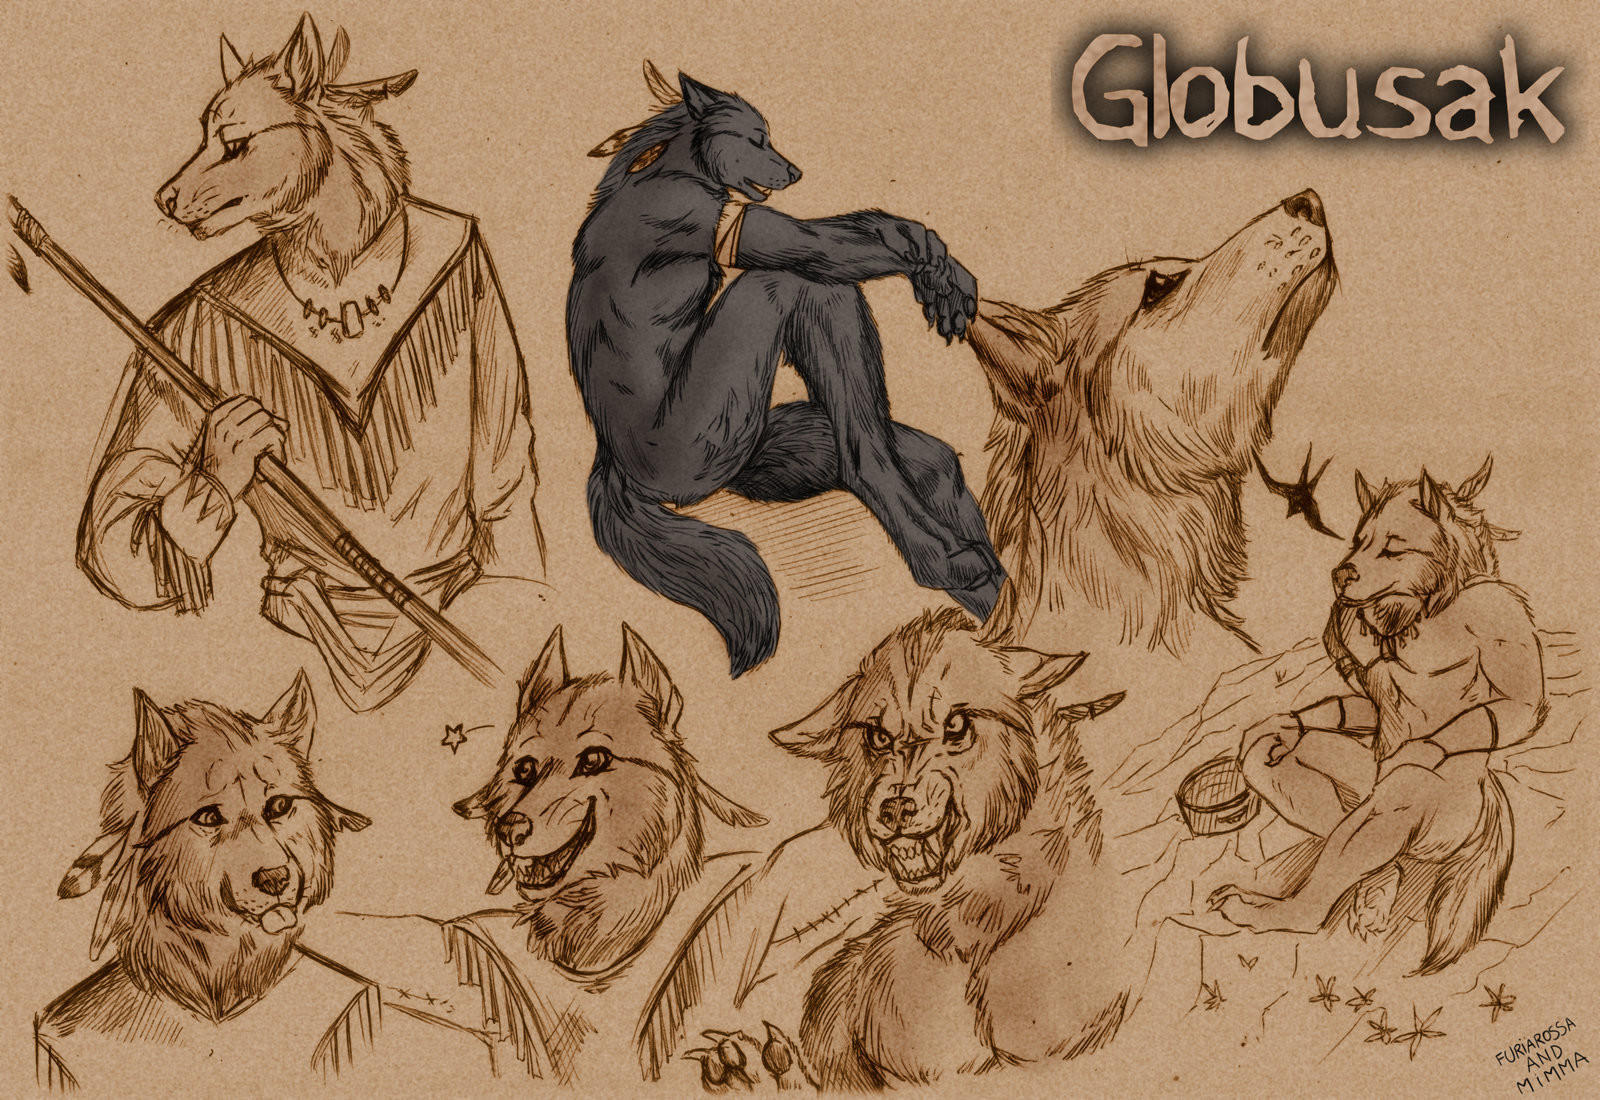 Study on the character Globusak the wolf, commission for Globusak on FurAffinity